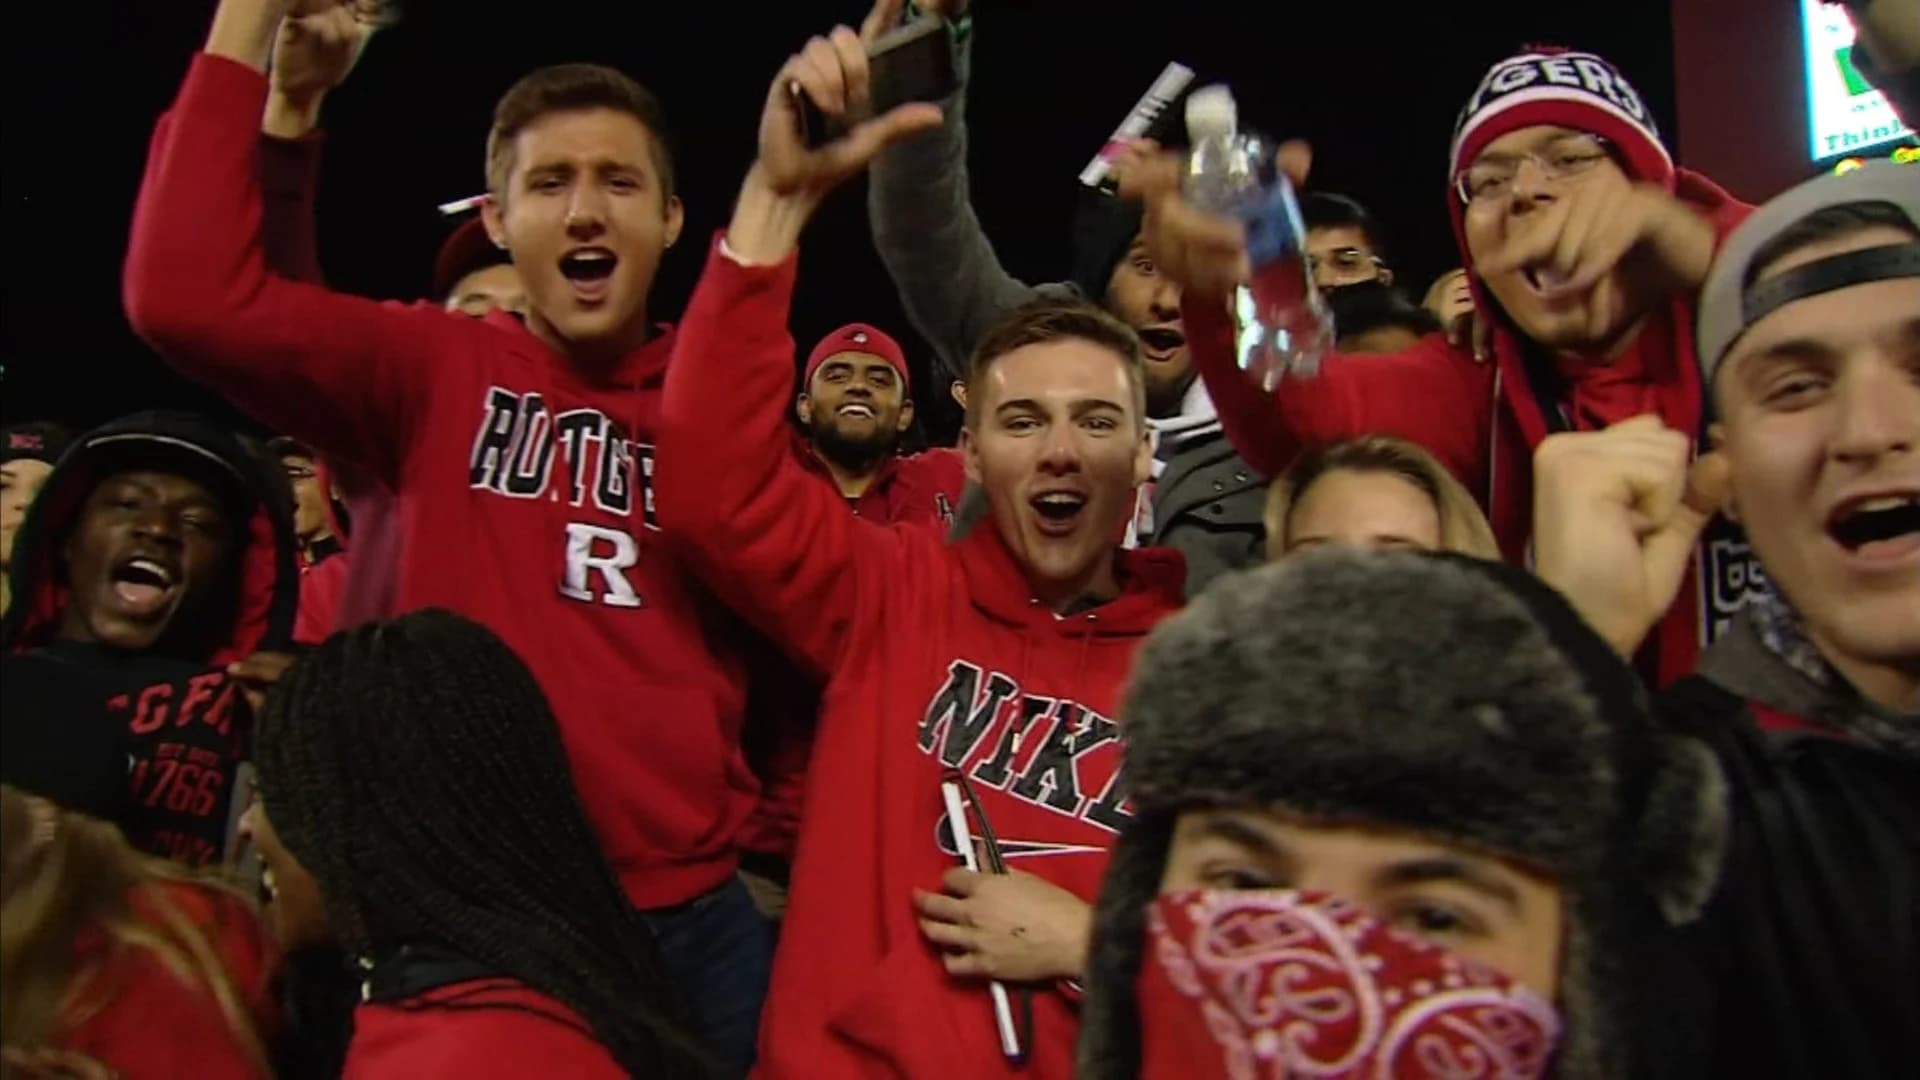 Rutgers to start selling alcohol at sporting events to help pay off debts